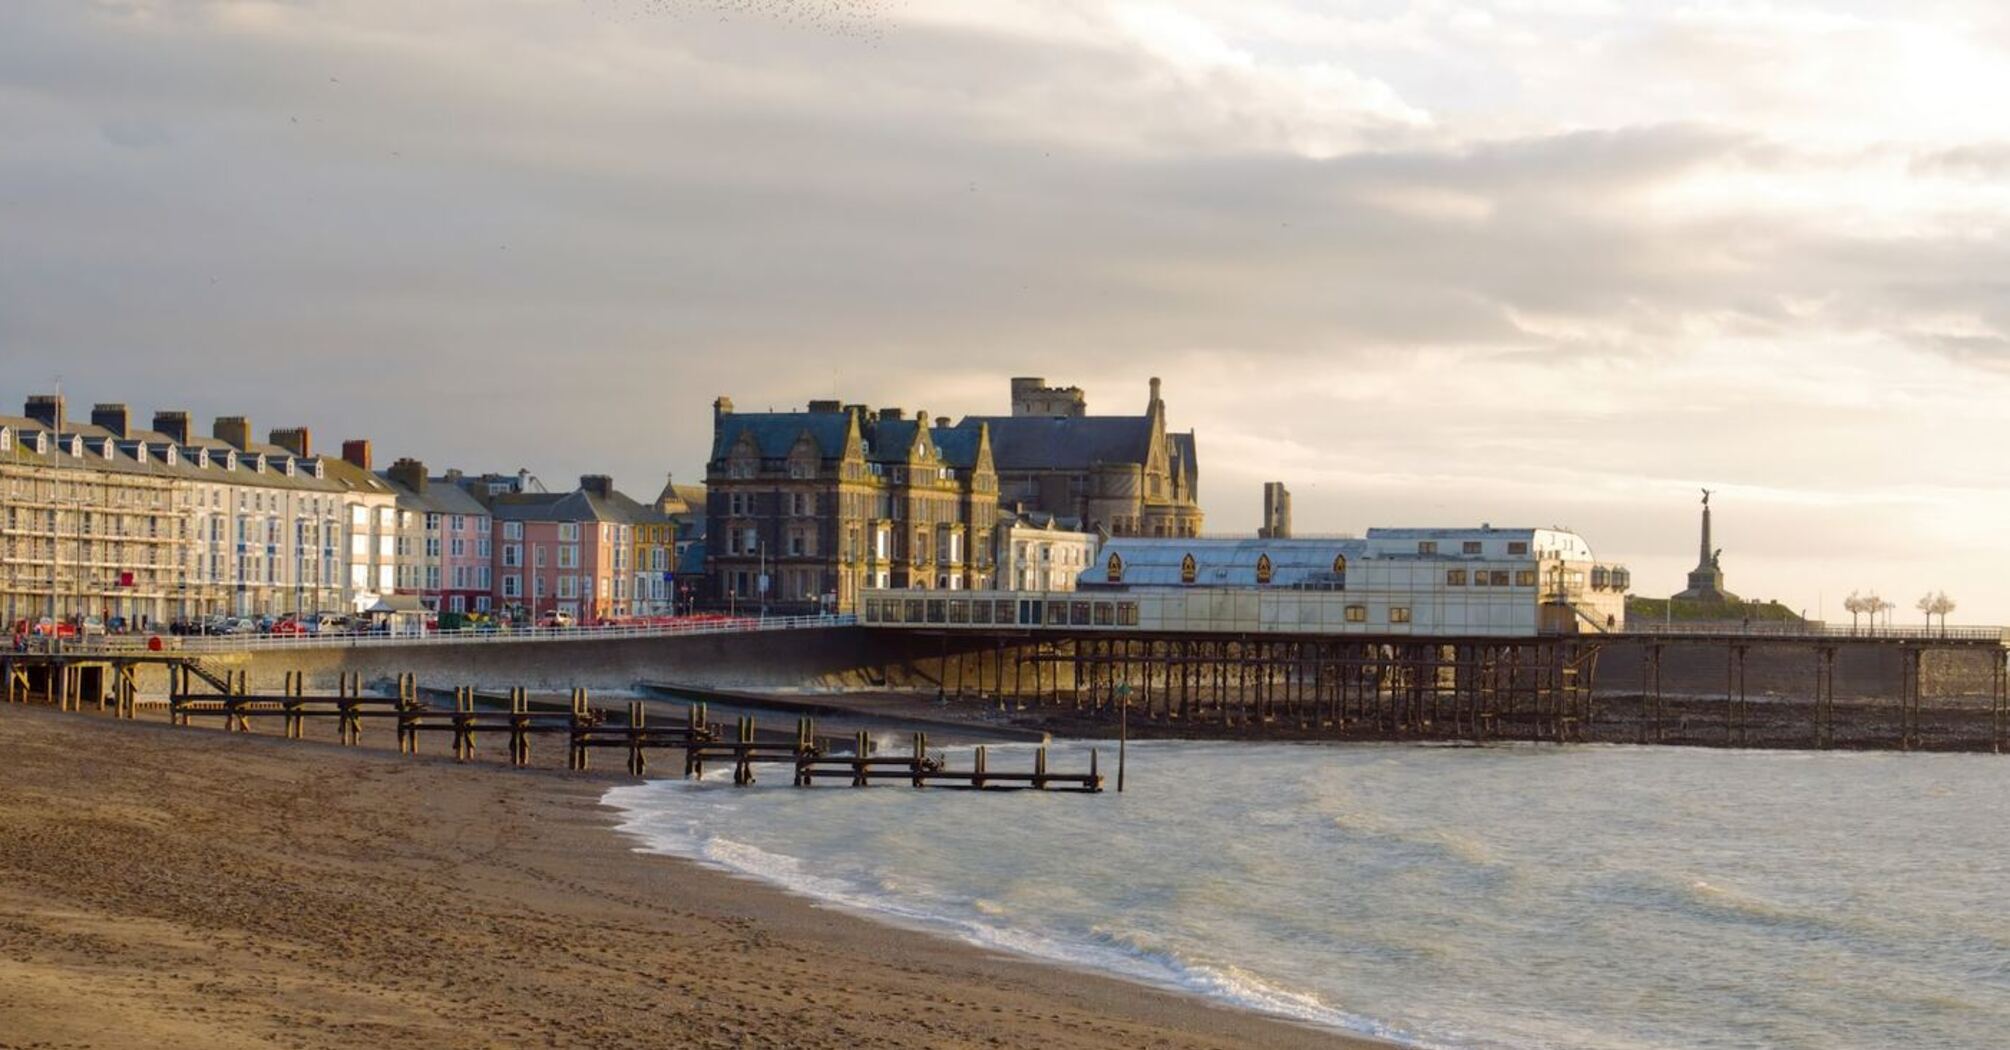 Scenic view of Aberystwyth coastline with historic buildings and a pier at sunset